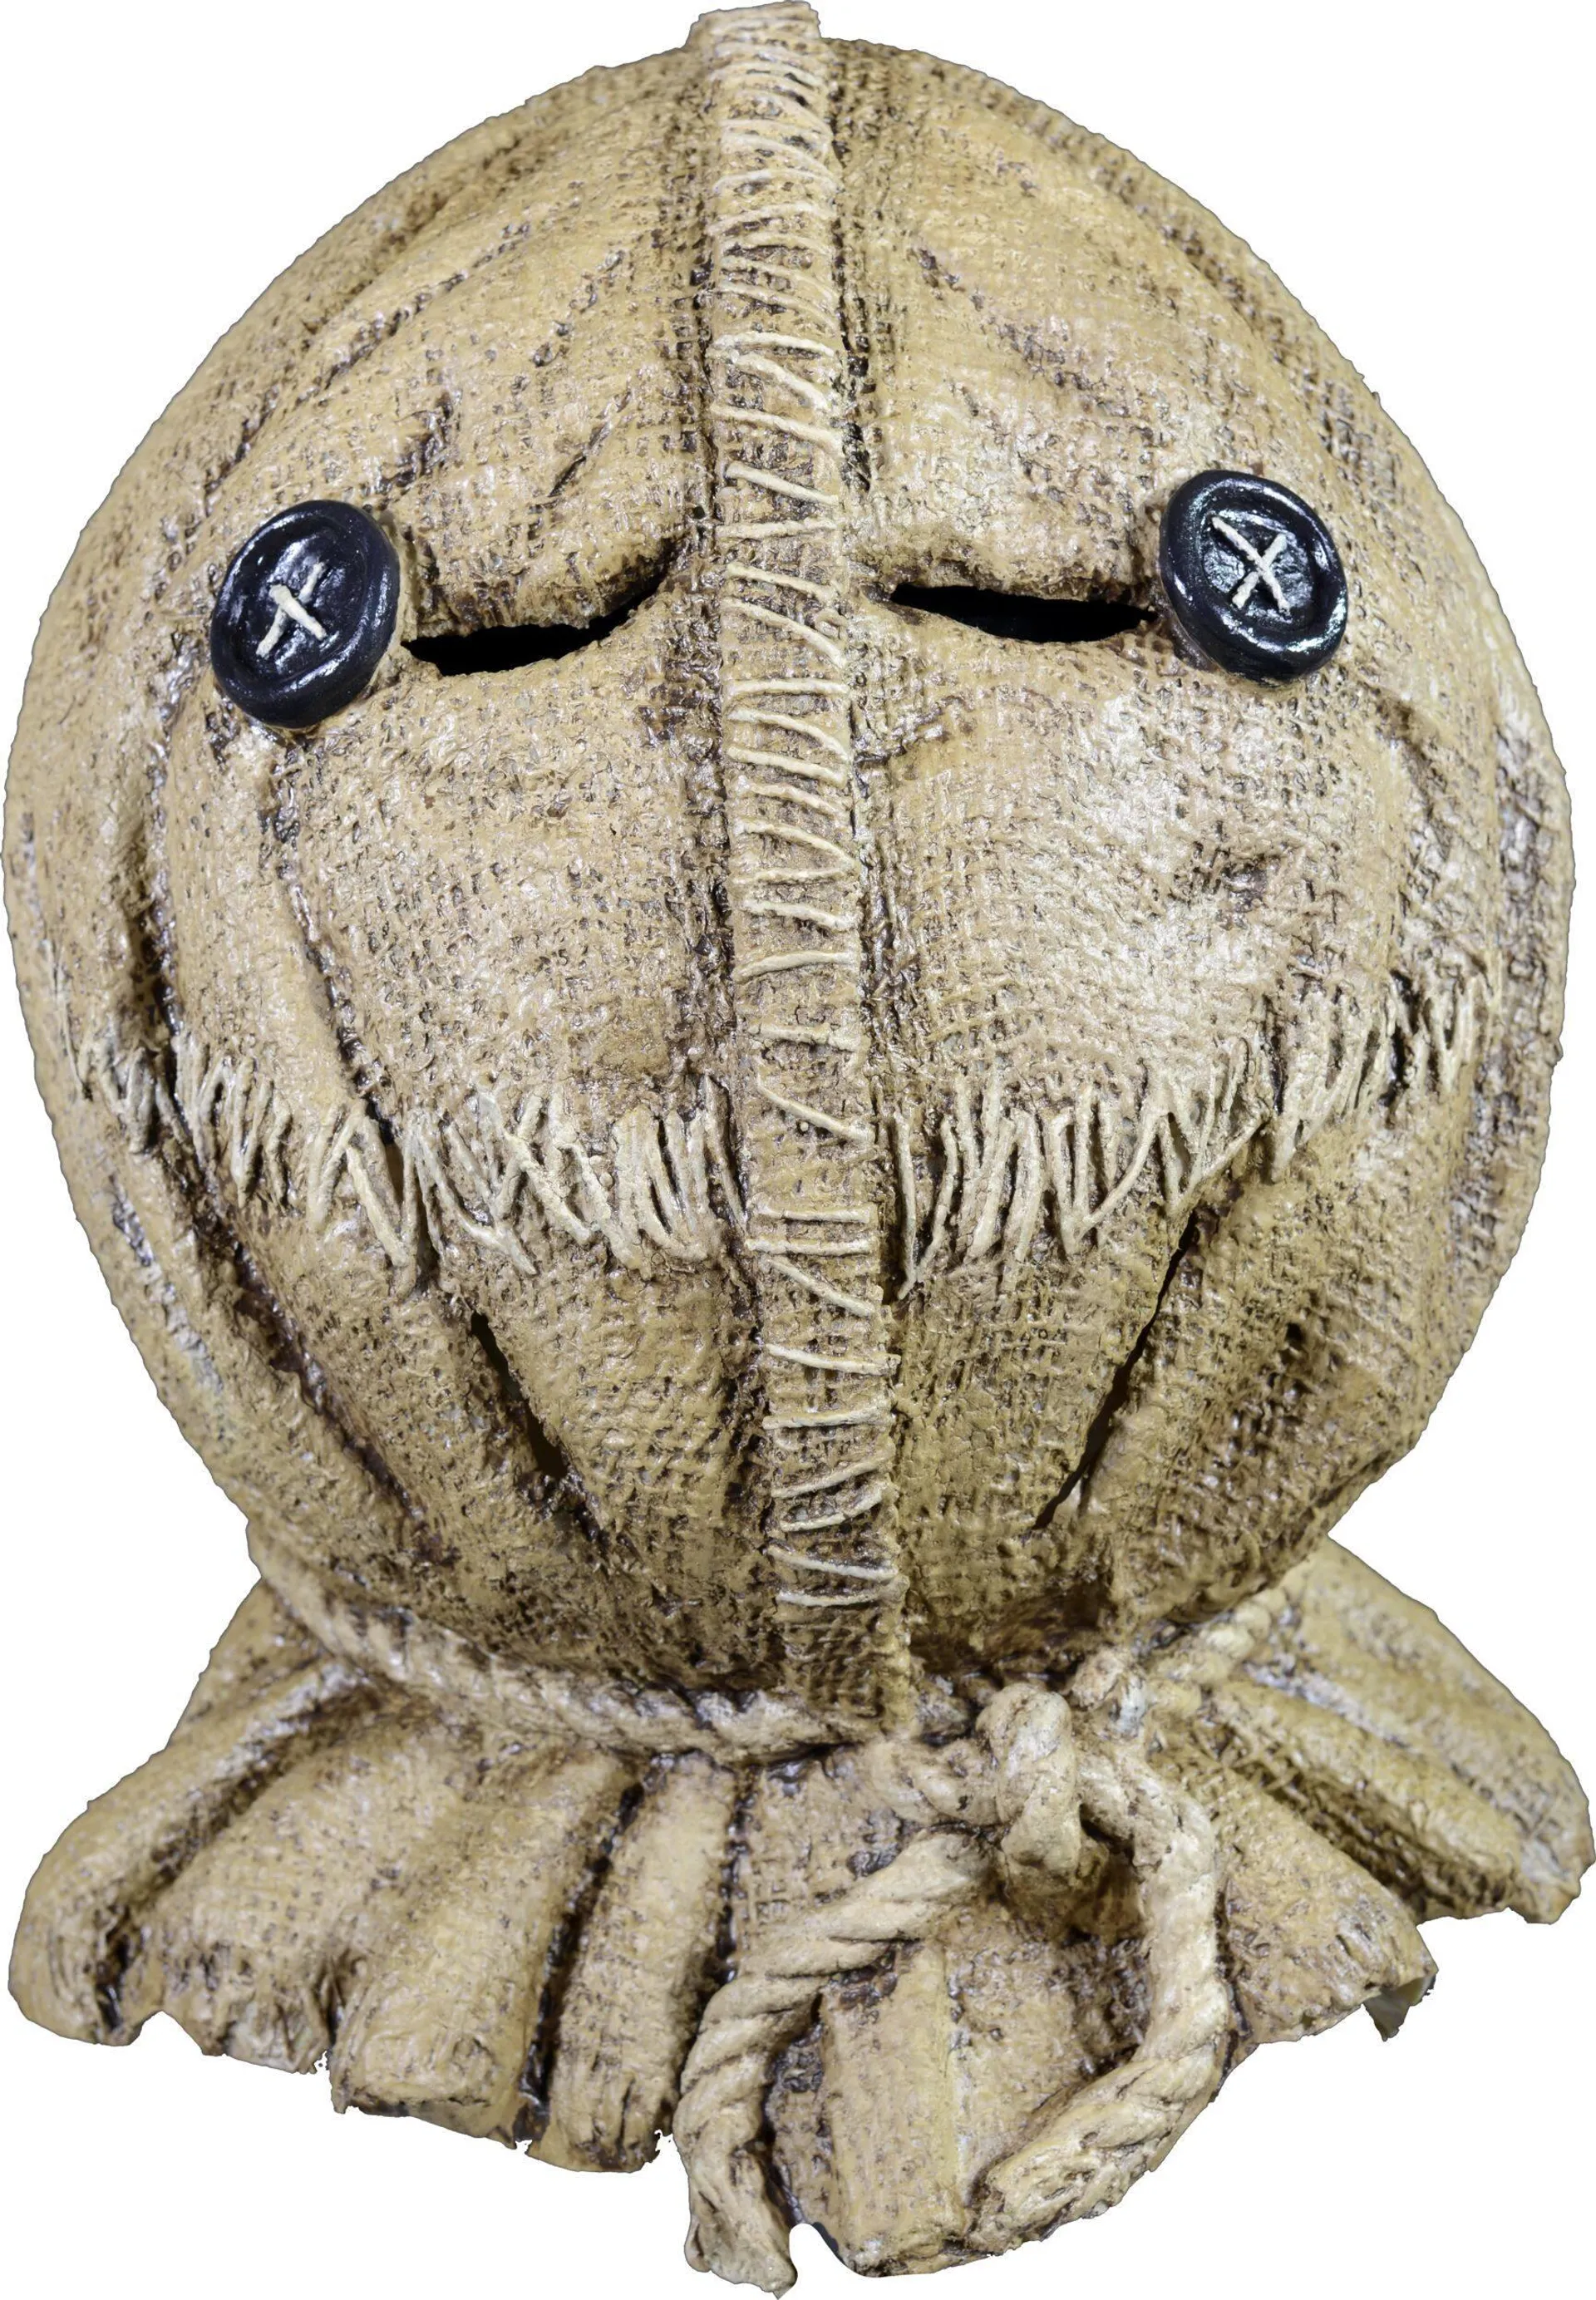 Trick 'r Treat Sam Burlap Stitched Mask, Brown, One Size, Wearable Costume Accessory for Halloween